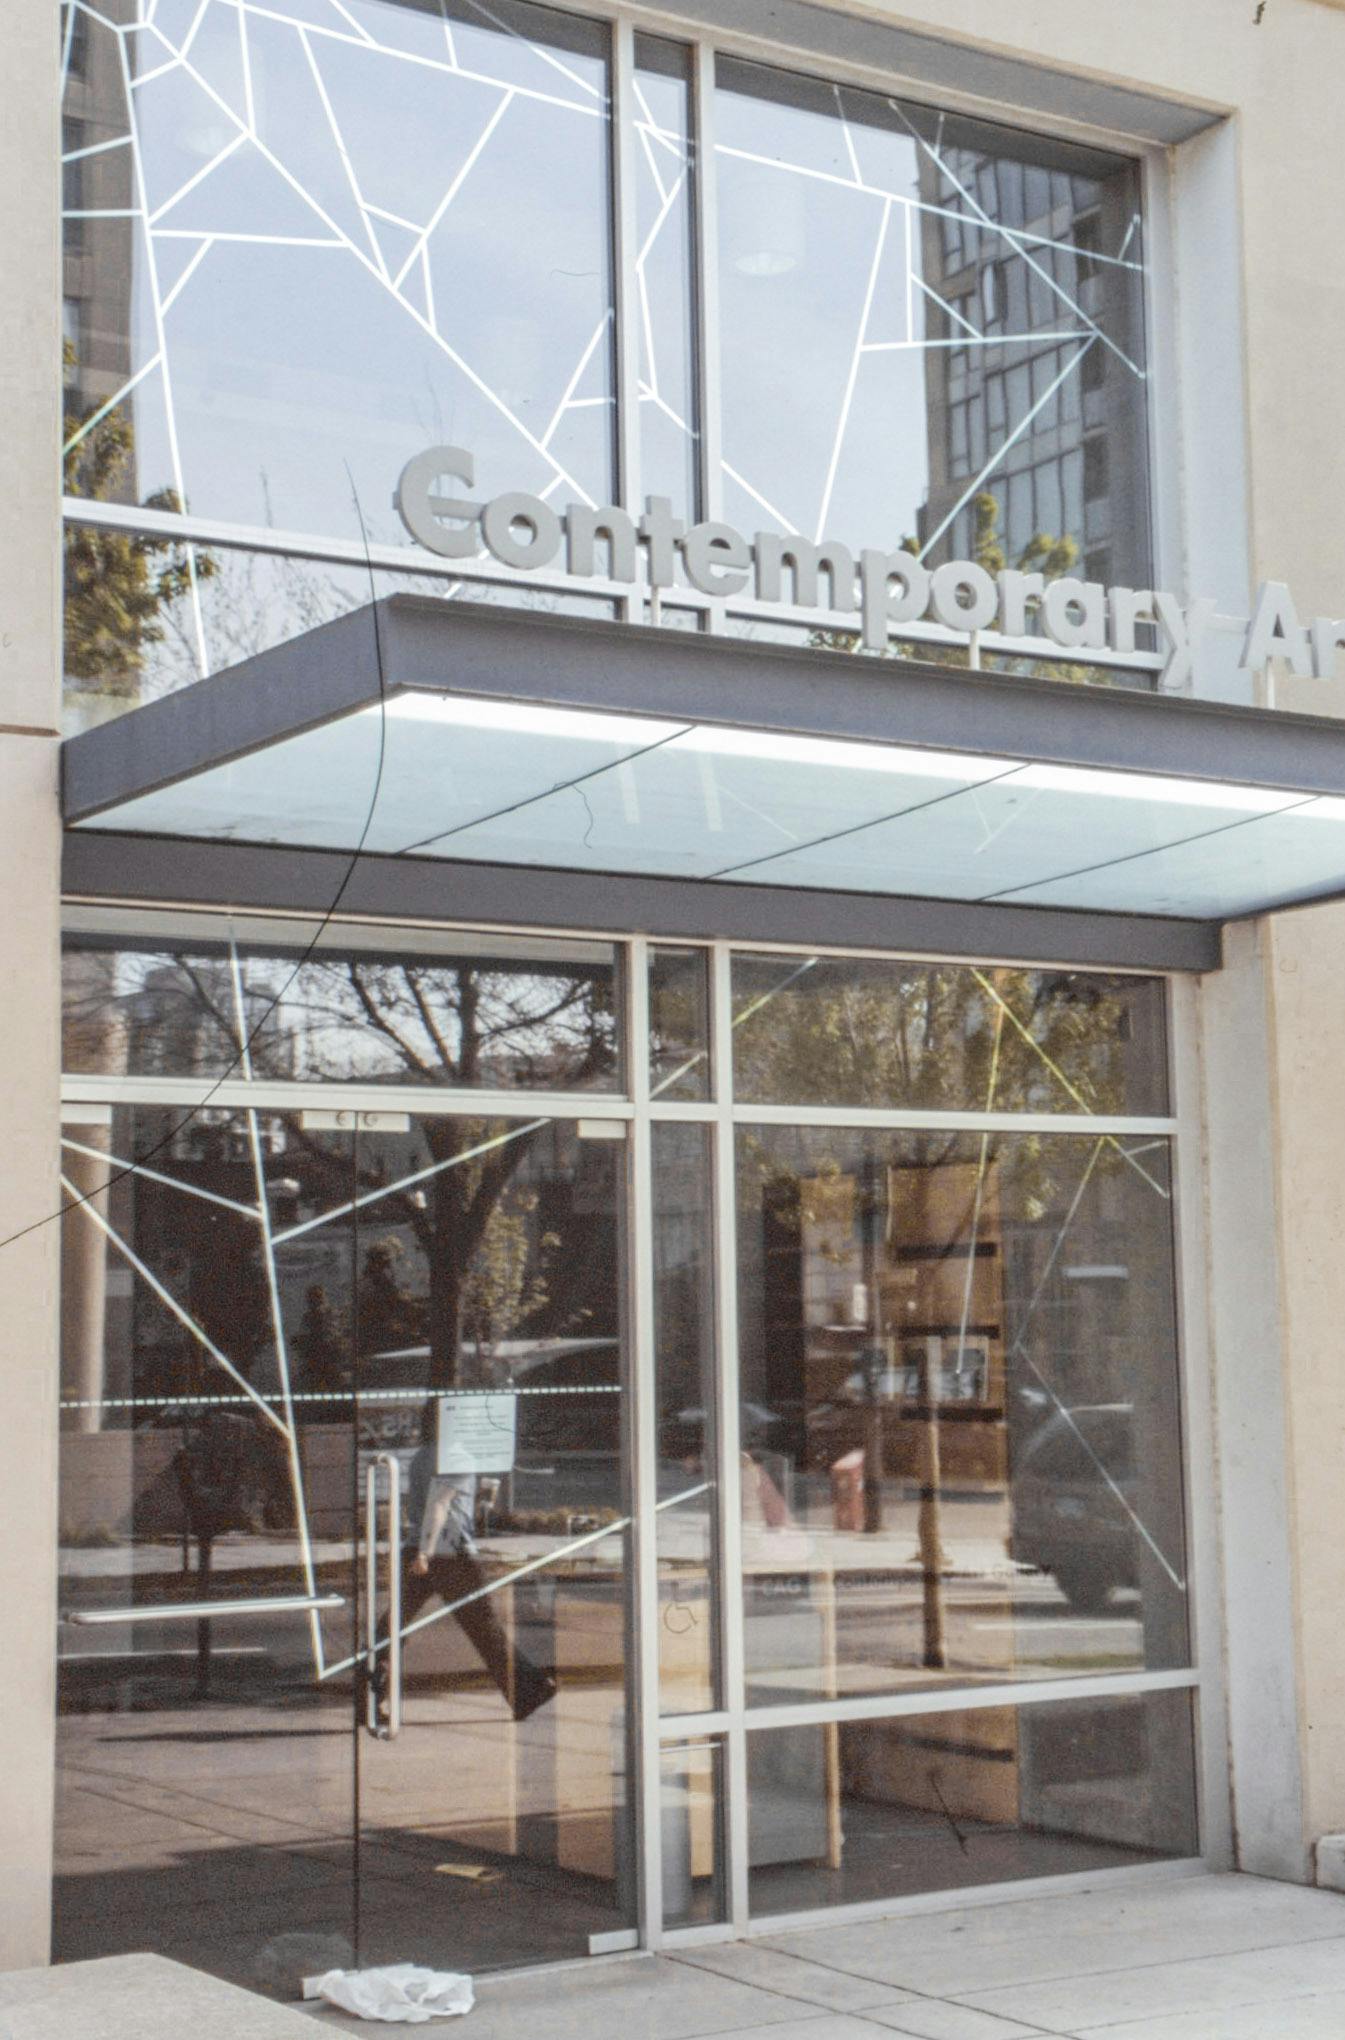 An image showing the front entrance door of the CAG seen from outside. A vinyl of a white spider’s web is printed on the CAG’s glass front door and windows above and besides it.